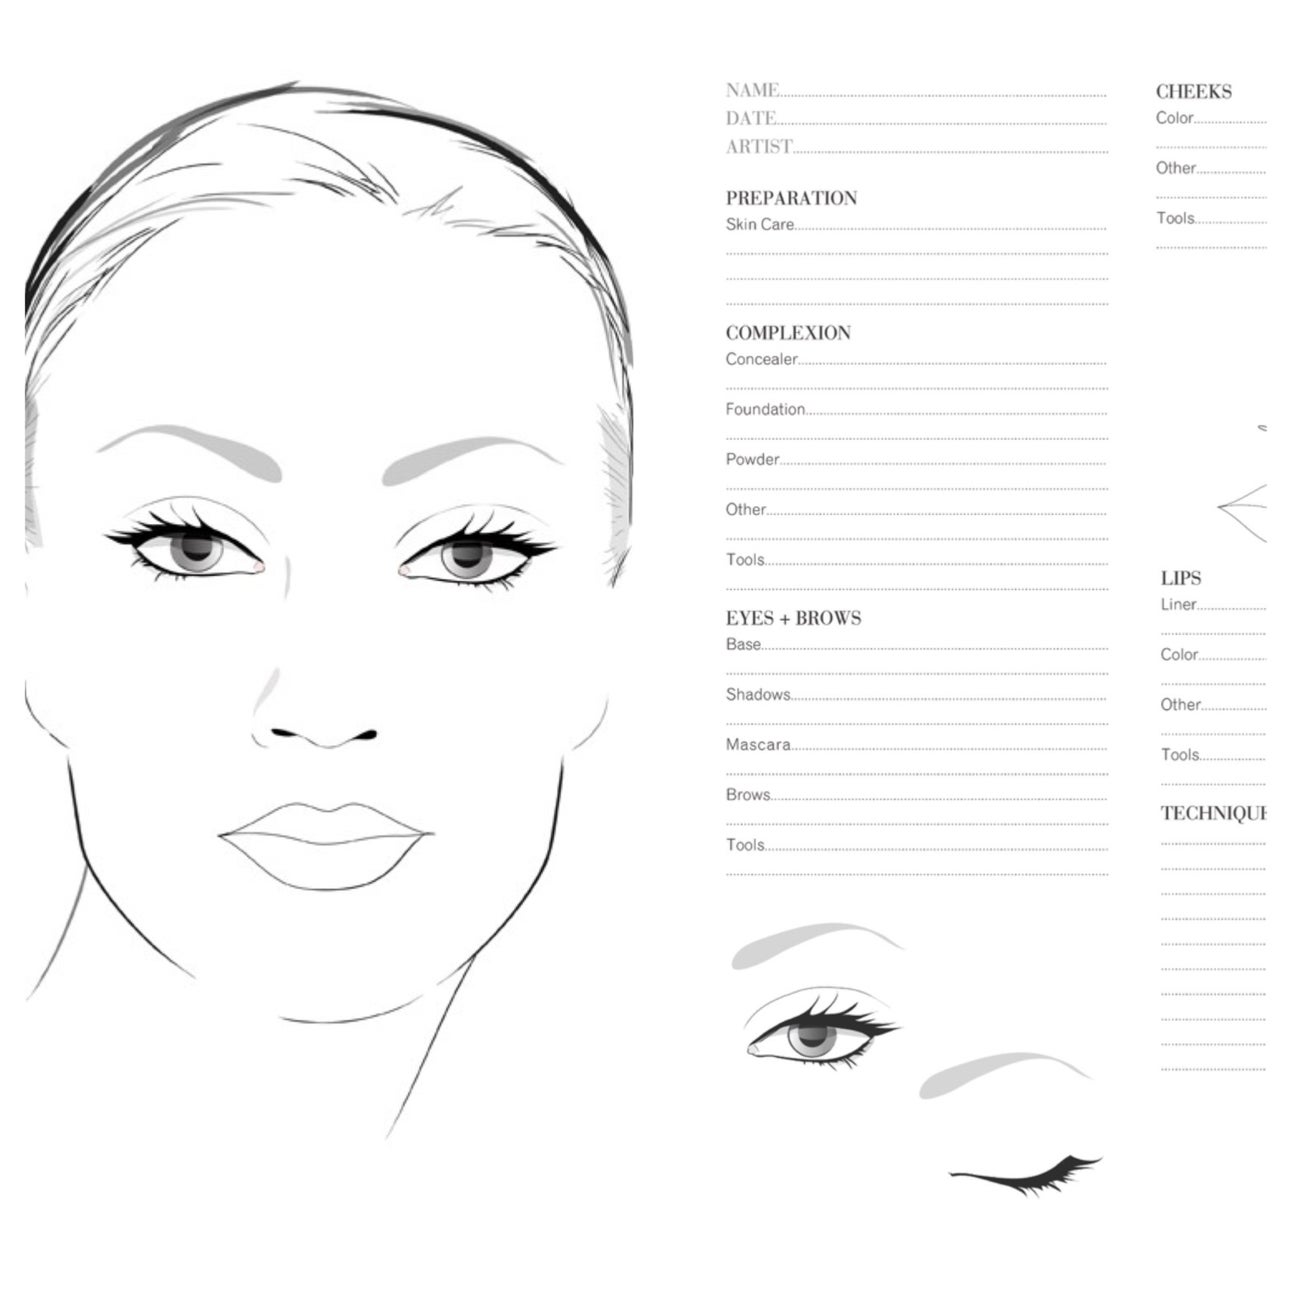 How To Do A Makeup Face Chart